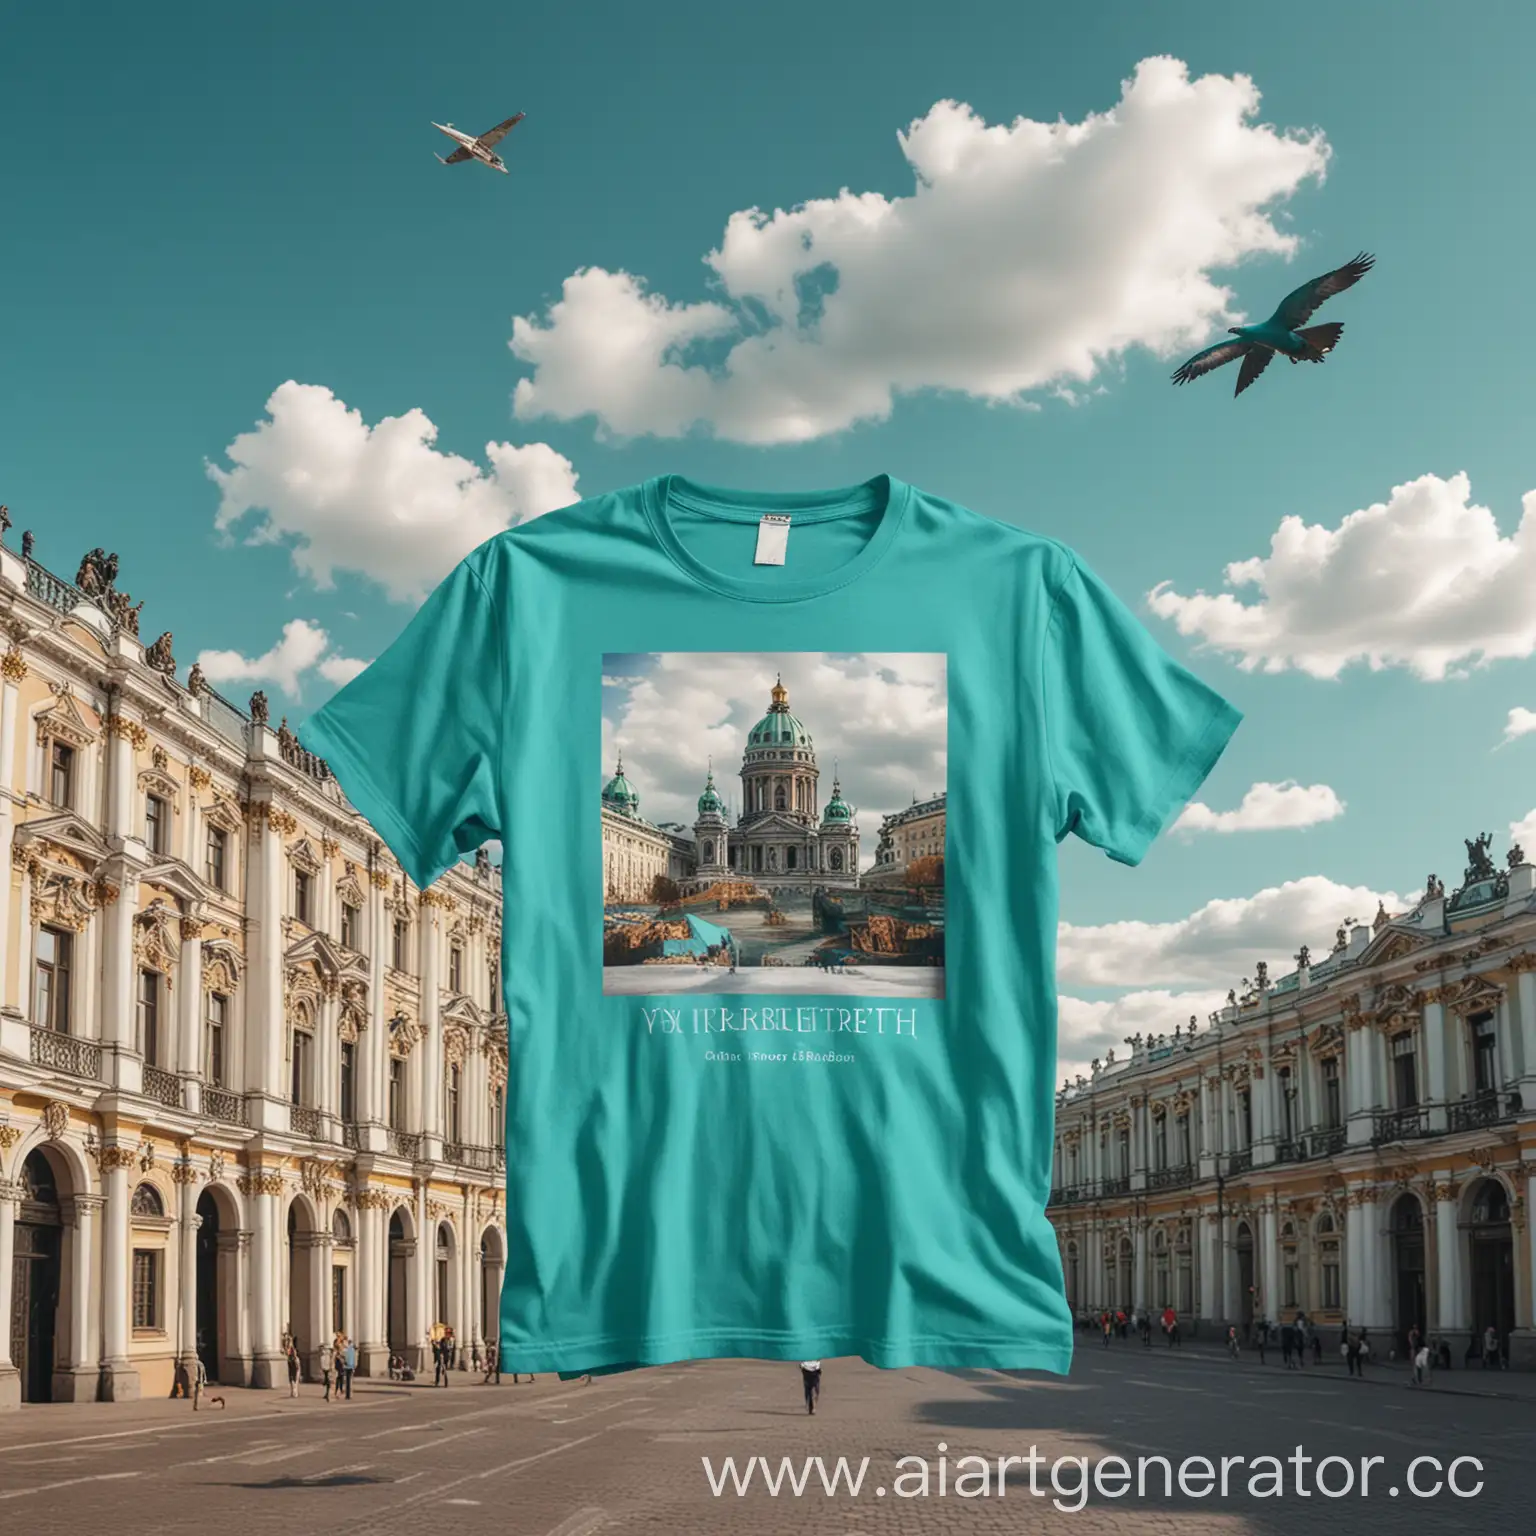 Create a huge turquoise t-shirt, which depicts the brand Vmerche from St. Petersburg, the t-shirt is lying on the Hermitage, and the same only small t-shirts are flying in the sky